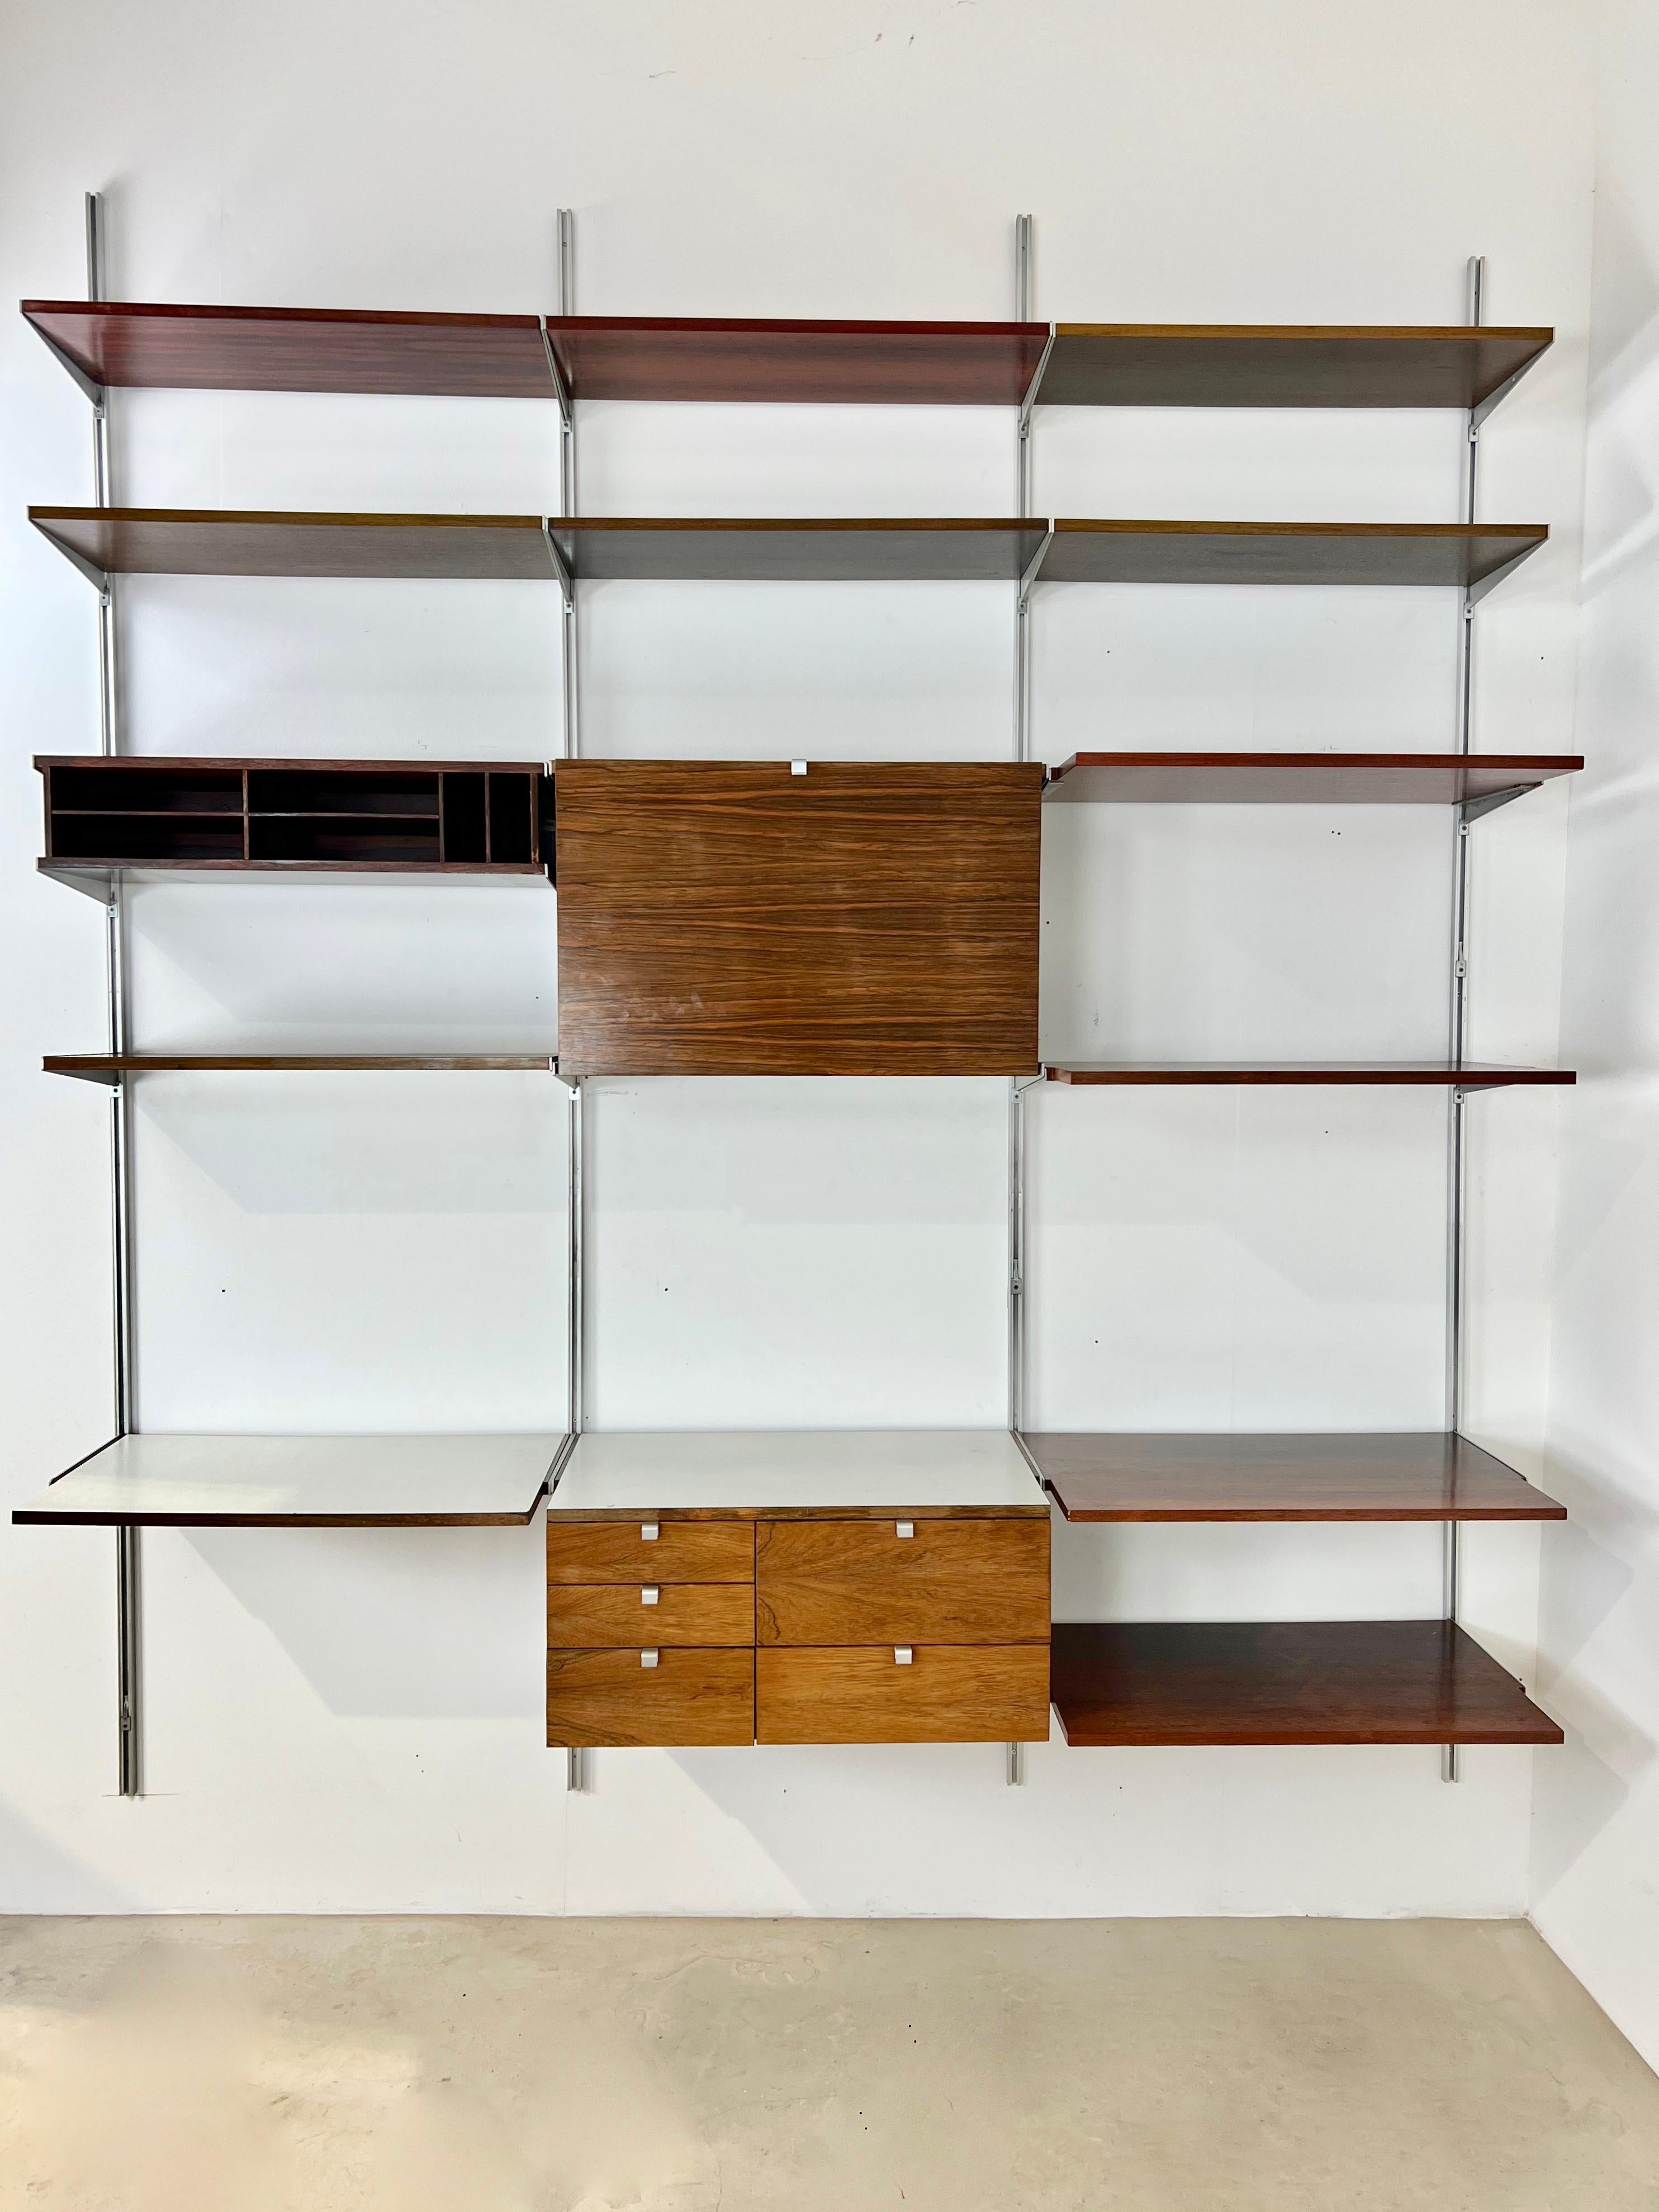 Modular wall unit, composed of 3 boxes, 4 aluminum uprights and 12 planks.
Wear due to time and age of the wall unit.